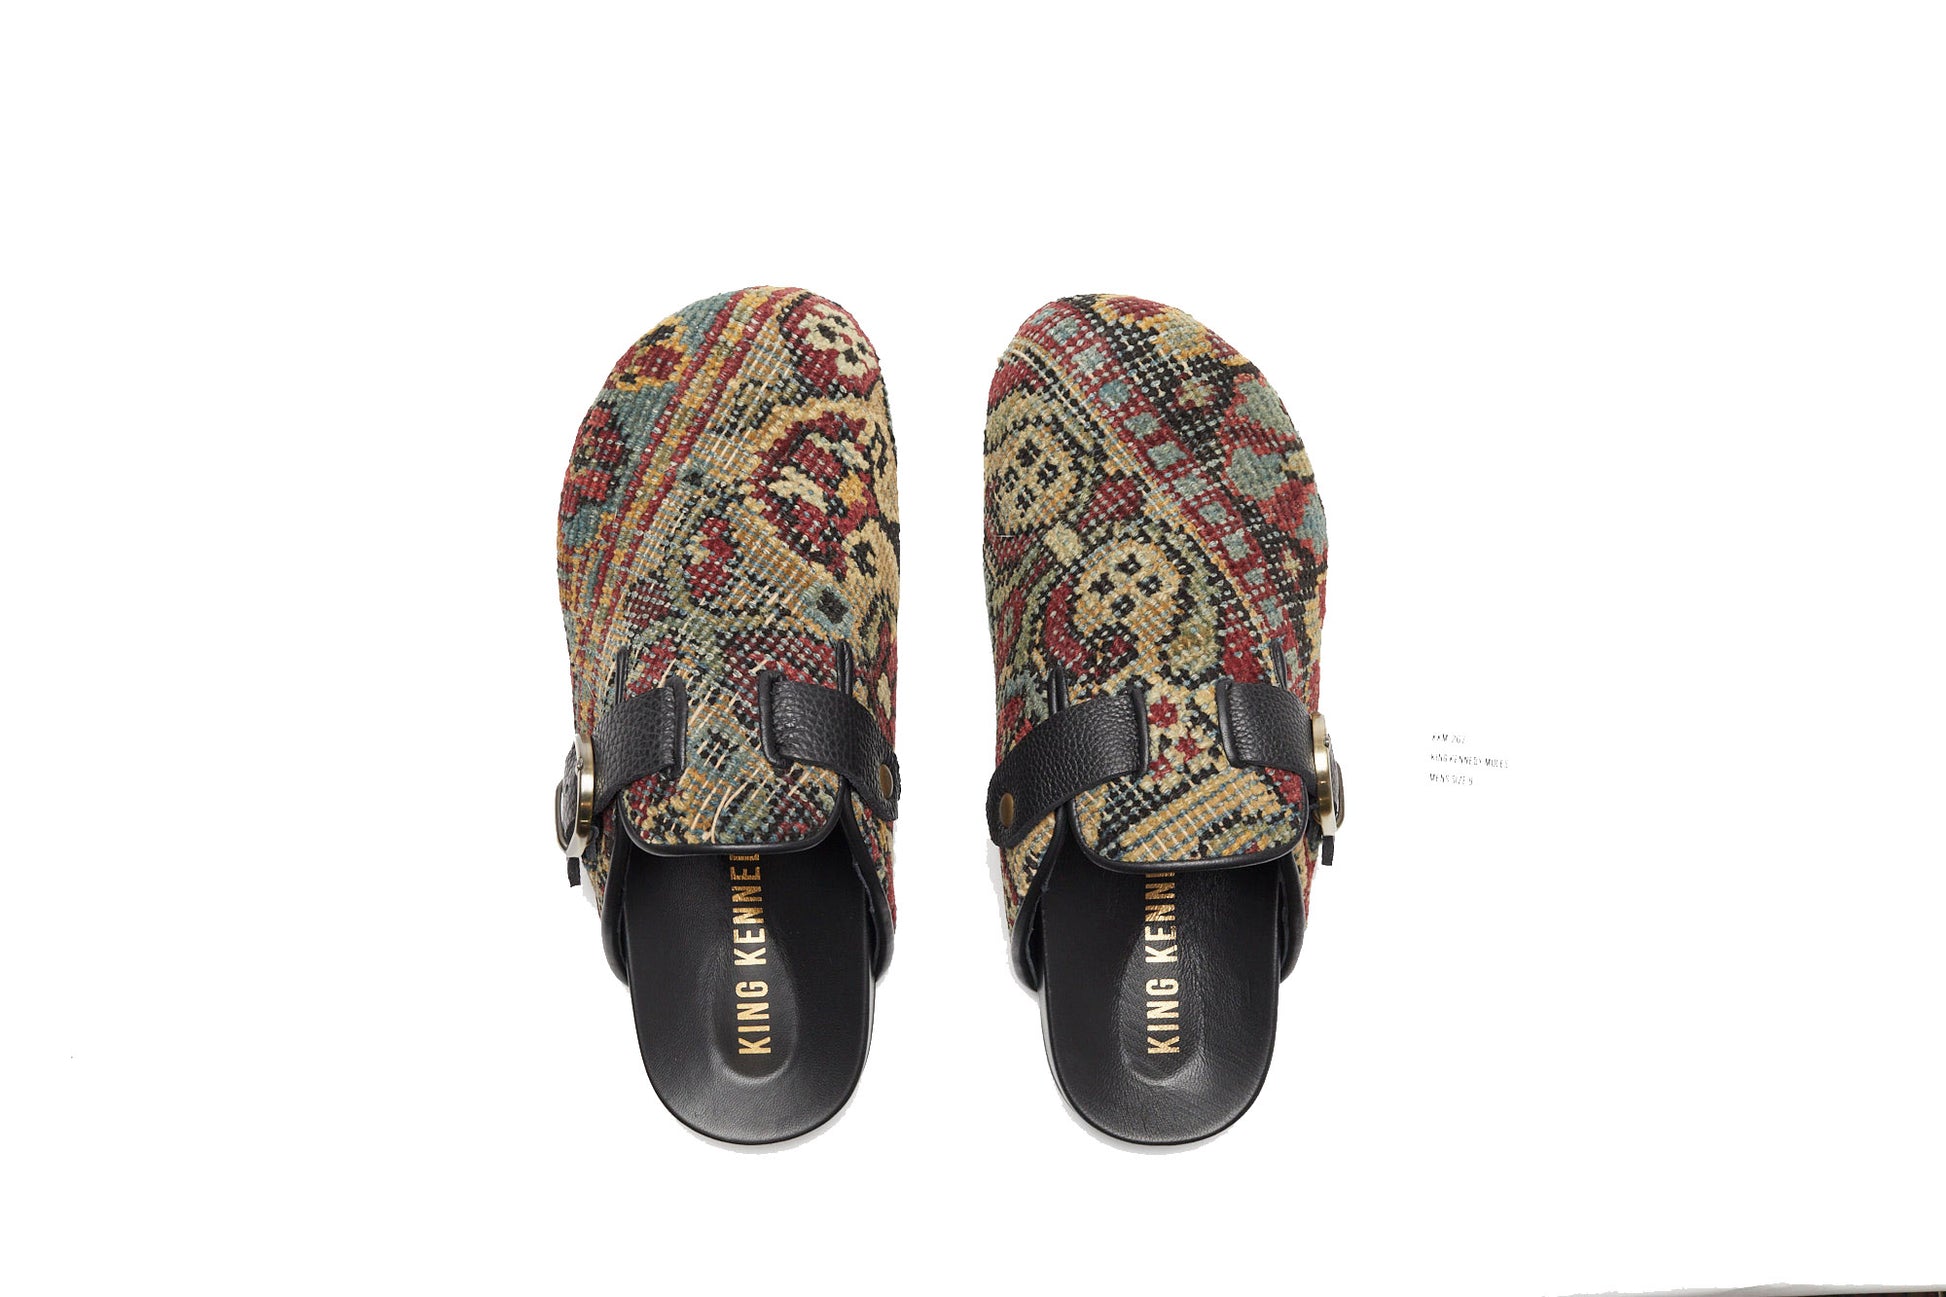 King Kennedy Rug Mules are one-of-a-kind and made of 100 year old antique Persian rug fragments with soft lambskin footbed and rubber sole. This pair is made of an antique Persian rug with beautifully faded pattern in beige, green, red, pale blue and yellow. 